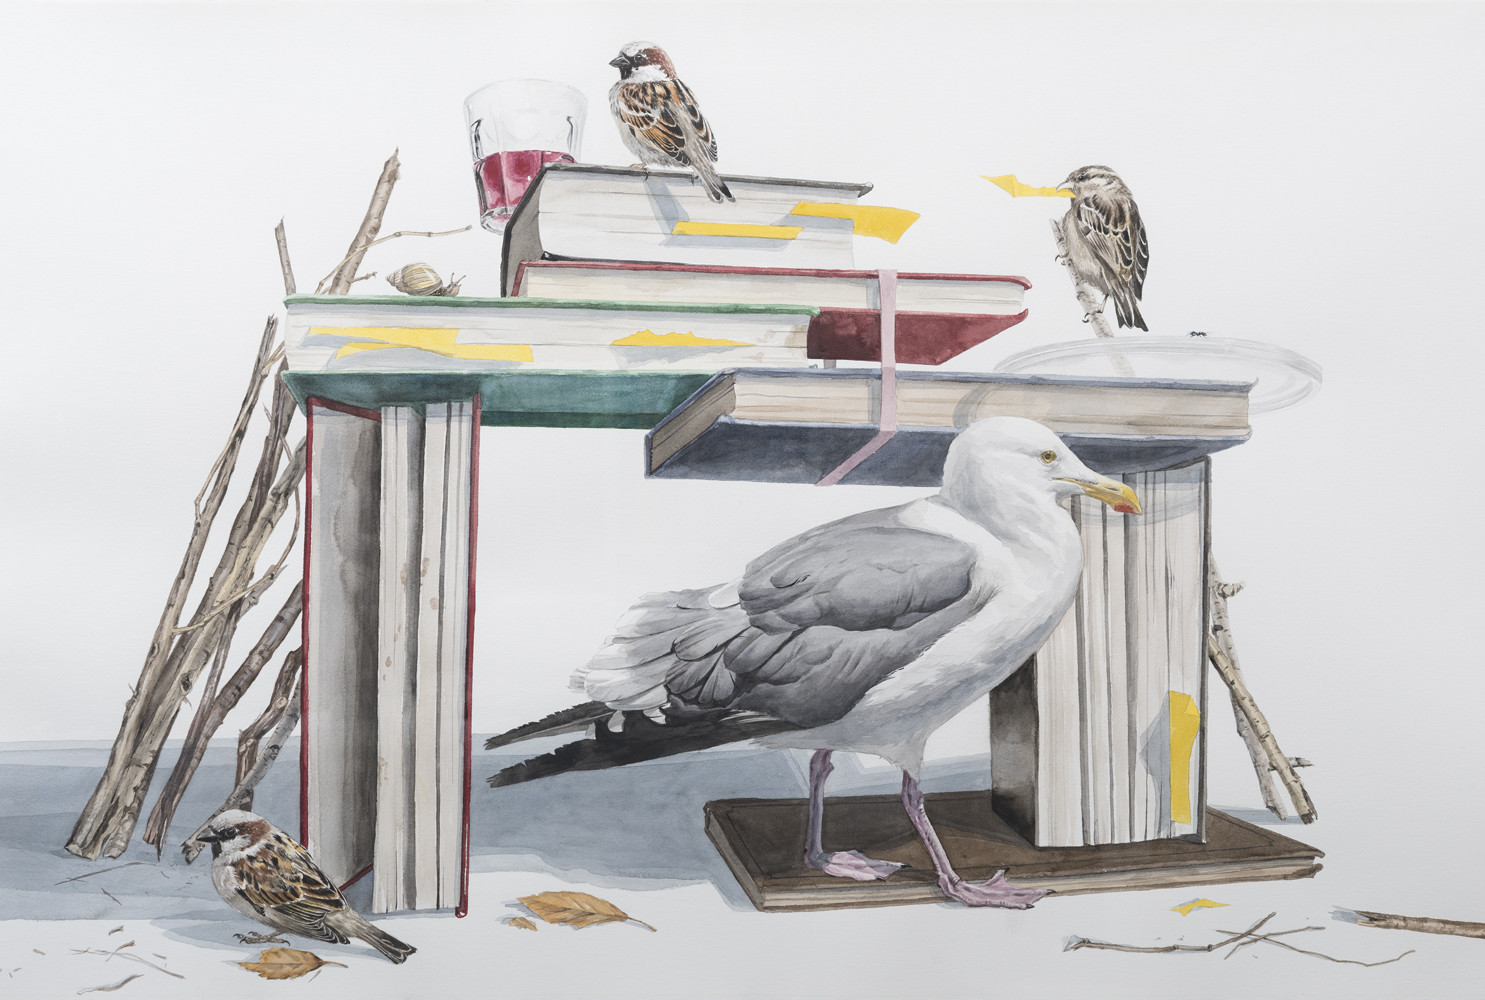 Thomas Broadbent (United States, b. 1955), The Construct, 2015. Watercolor on paper. 40 x 60 inches. Gift of 2016 Blacktail Gala, National Museum of Wildlife Art. © Thomas Broadbent. M2016.005